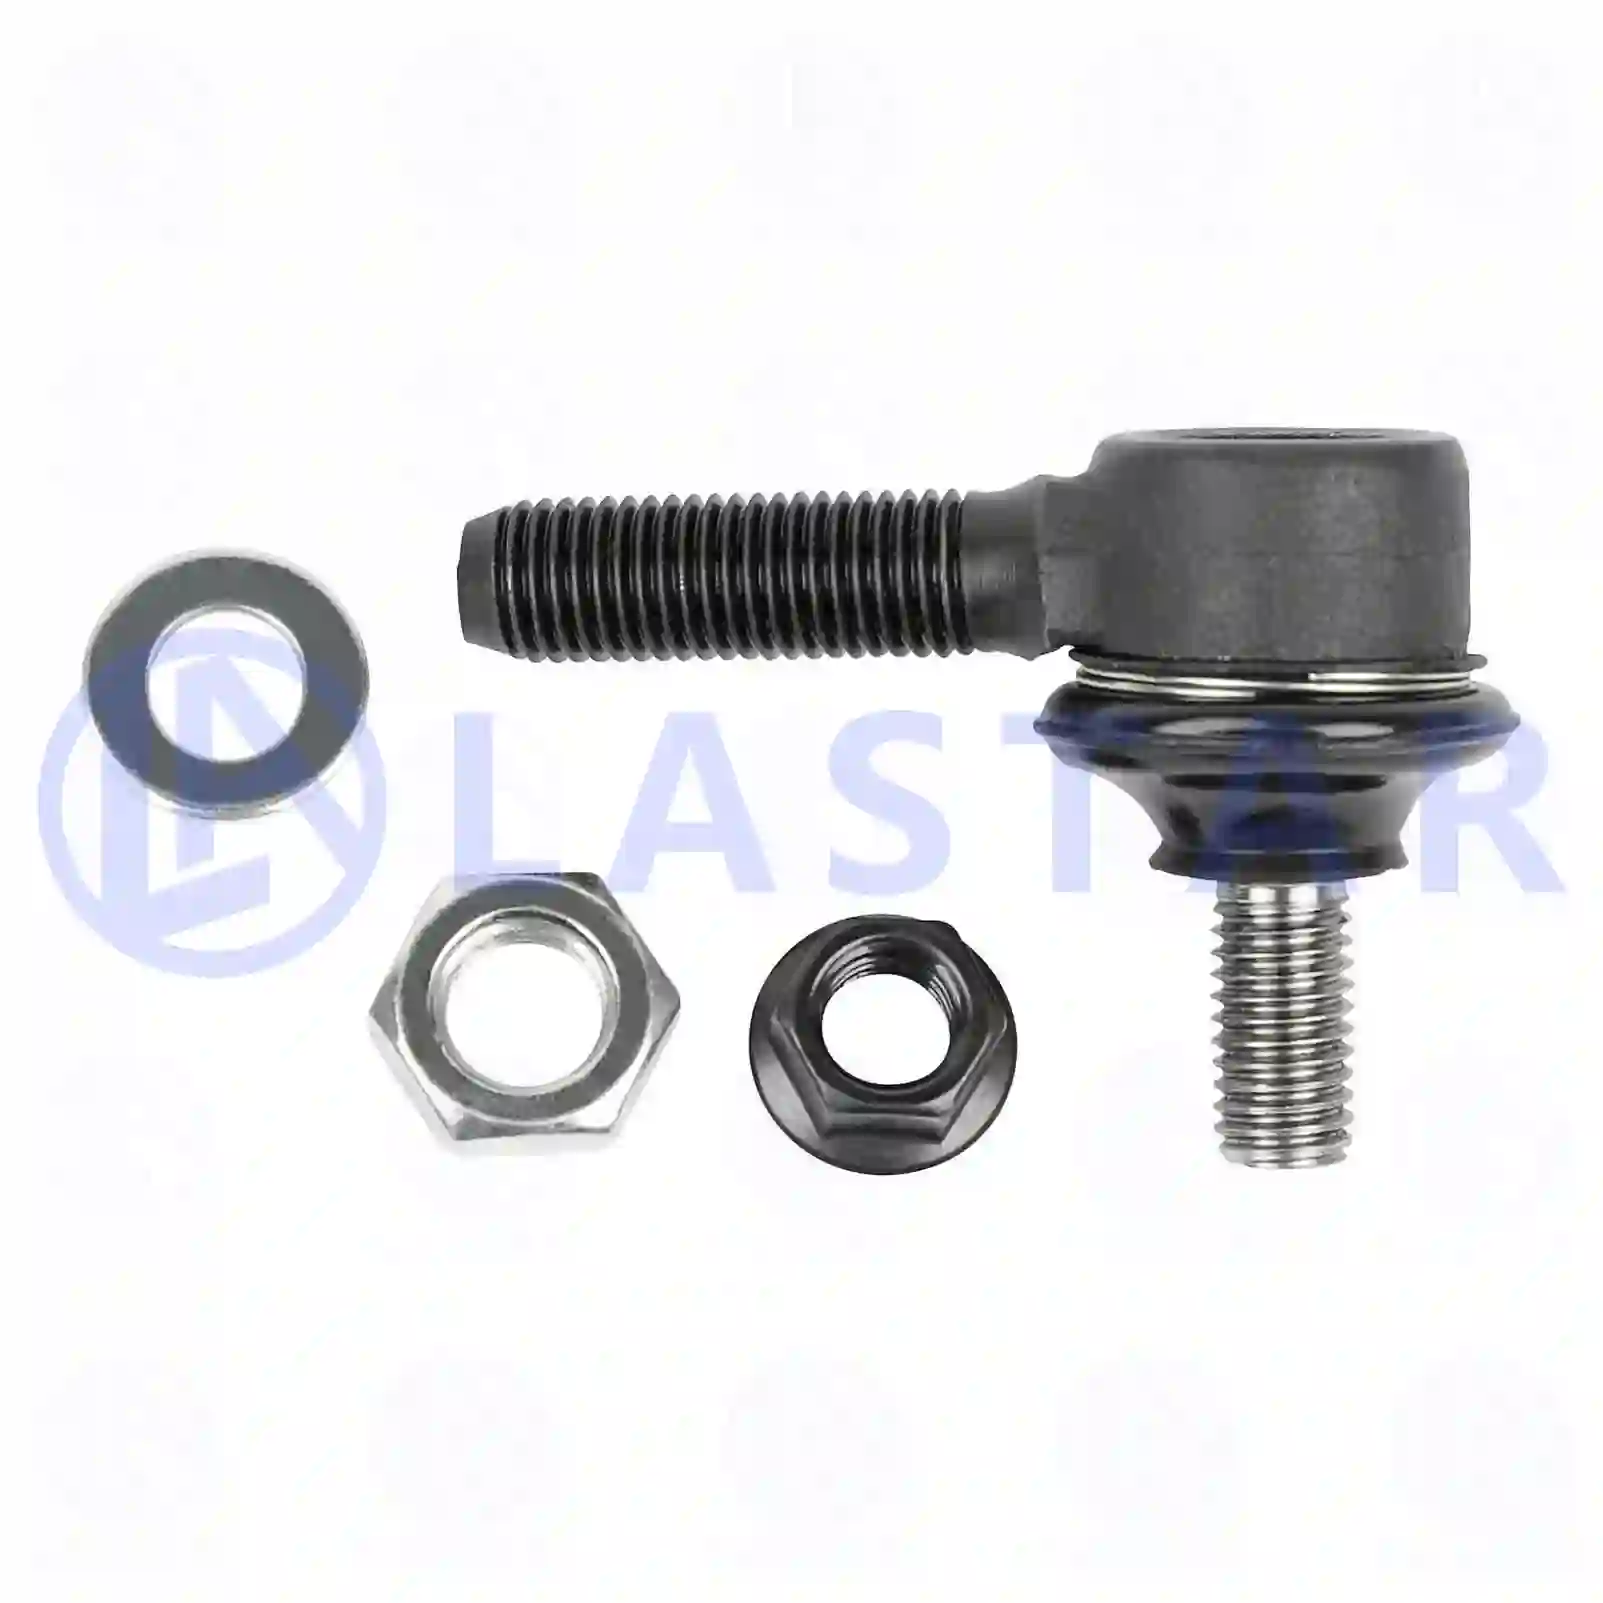 Ball joint, right hand thread, 77727072, 382613, 382618, ZG40843-0008, , ||  77727072 Lastar Spare Part | Truck Spare Parts, Auotomotive Spare Parts Ball joint, right hand thread, 77727072, 382613, 382618, ZG40843-0008, , ||  77727072 Lastar Spare Part | Truck Spare Parts, Auotomotive Spare Parts